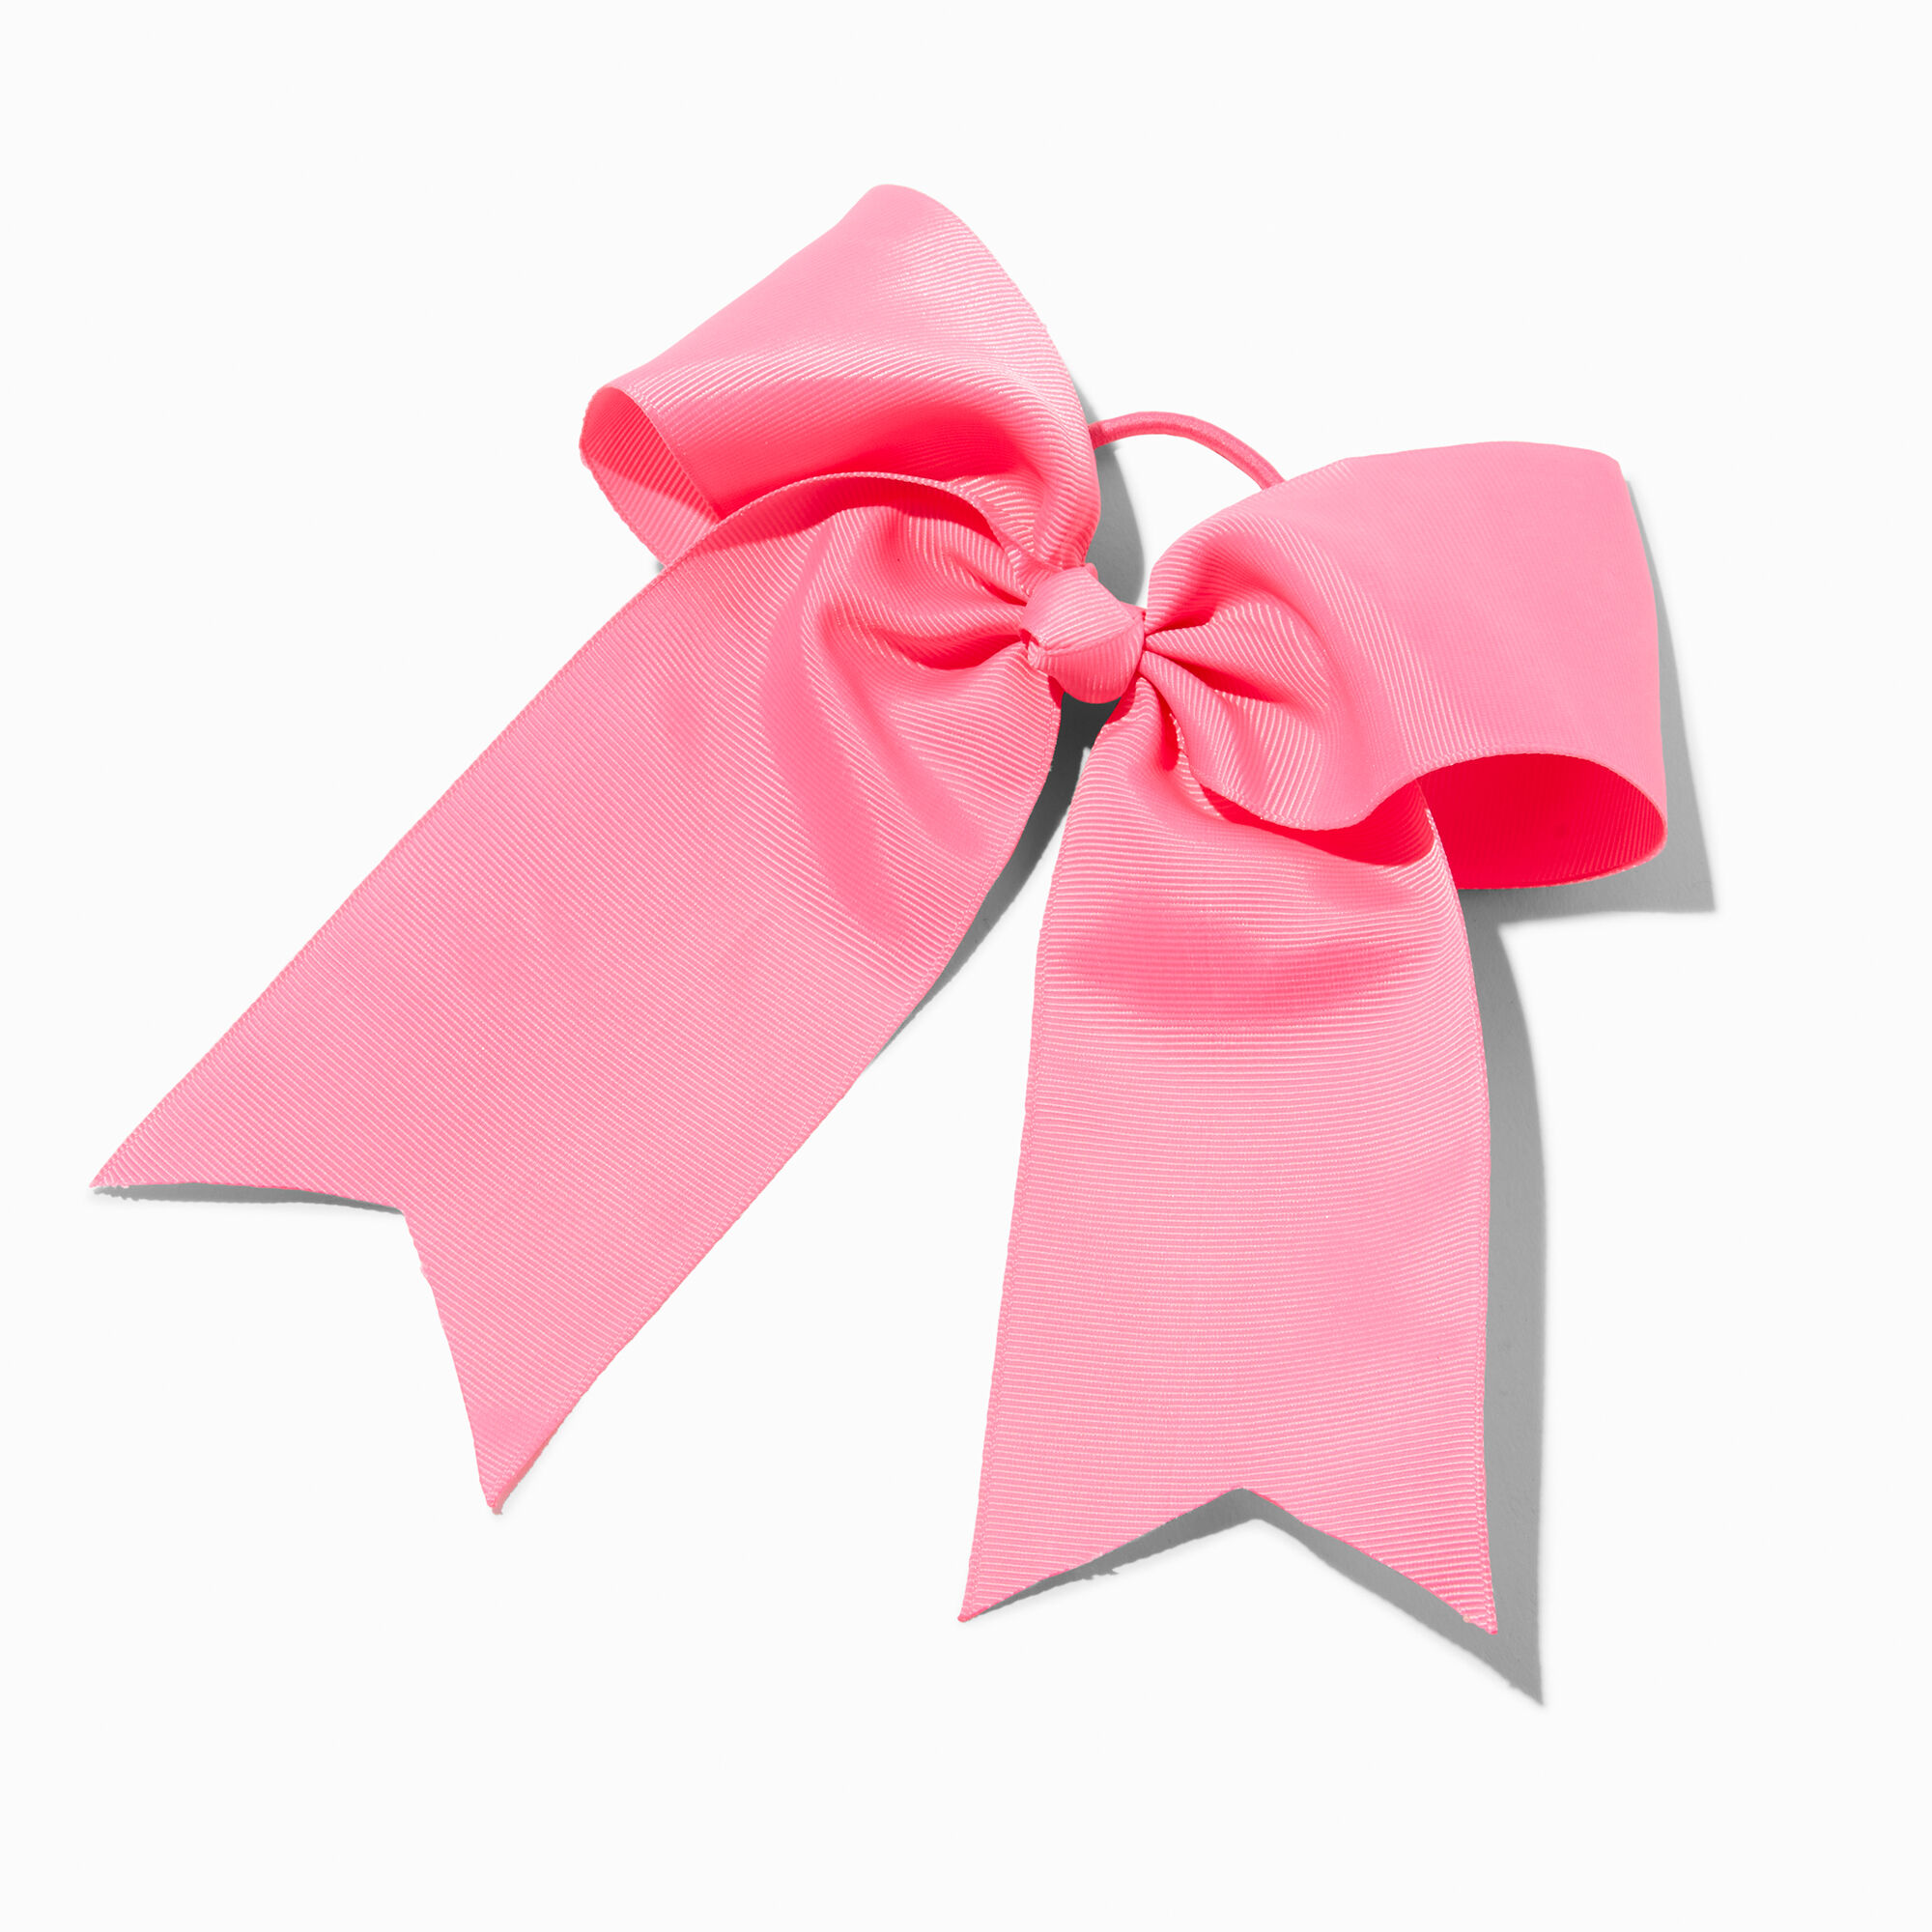 View Claires Large Bow Hair Tie Pink information